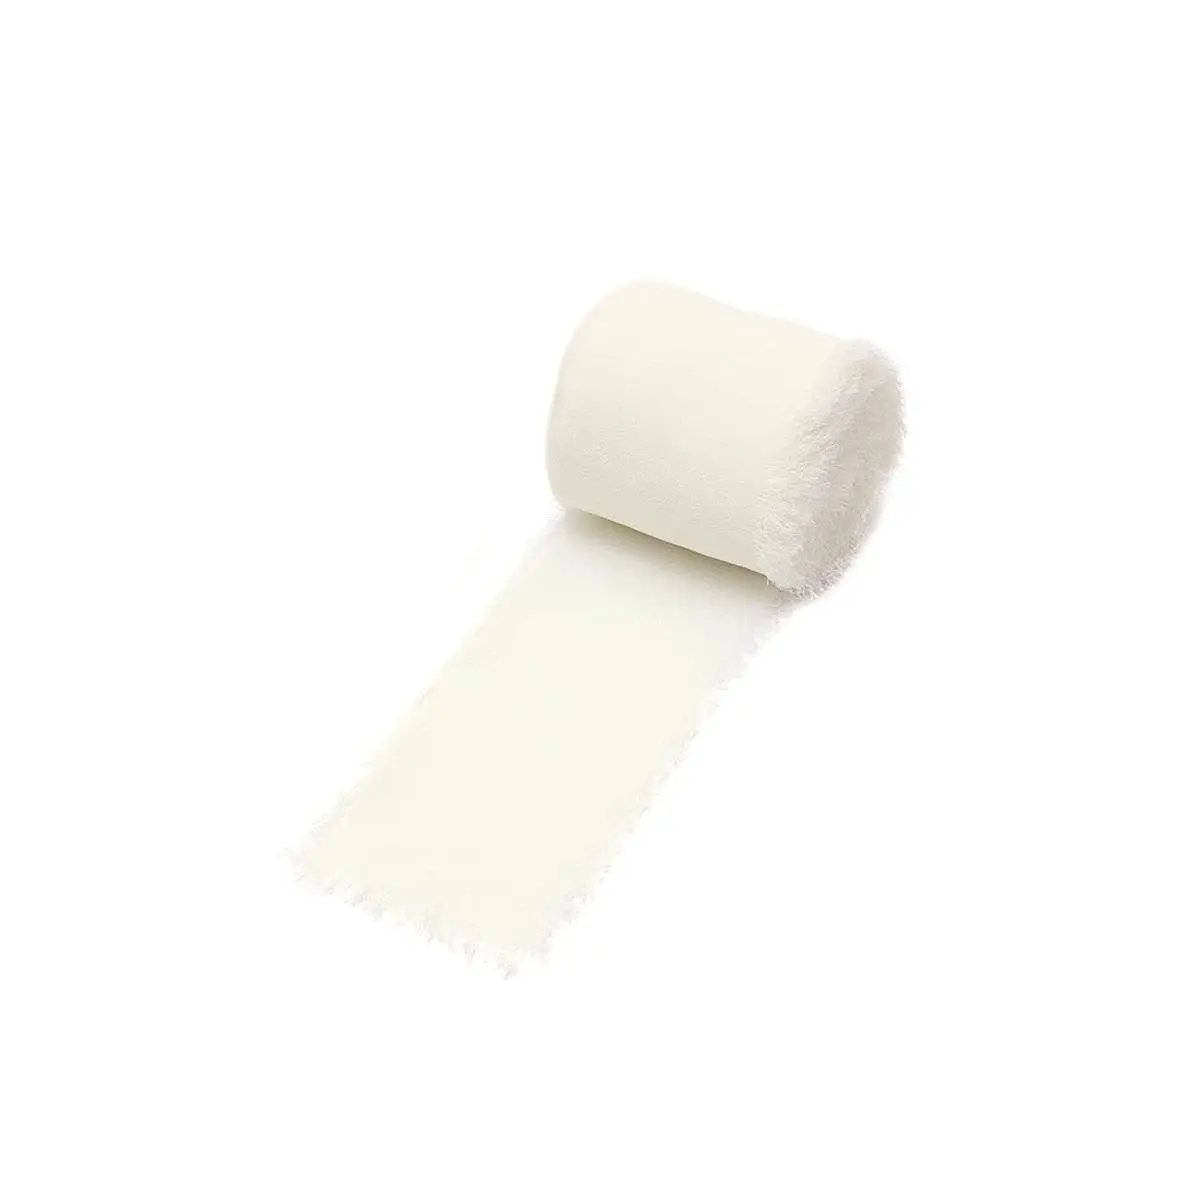 a roll of toilet paper on a white background